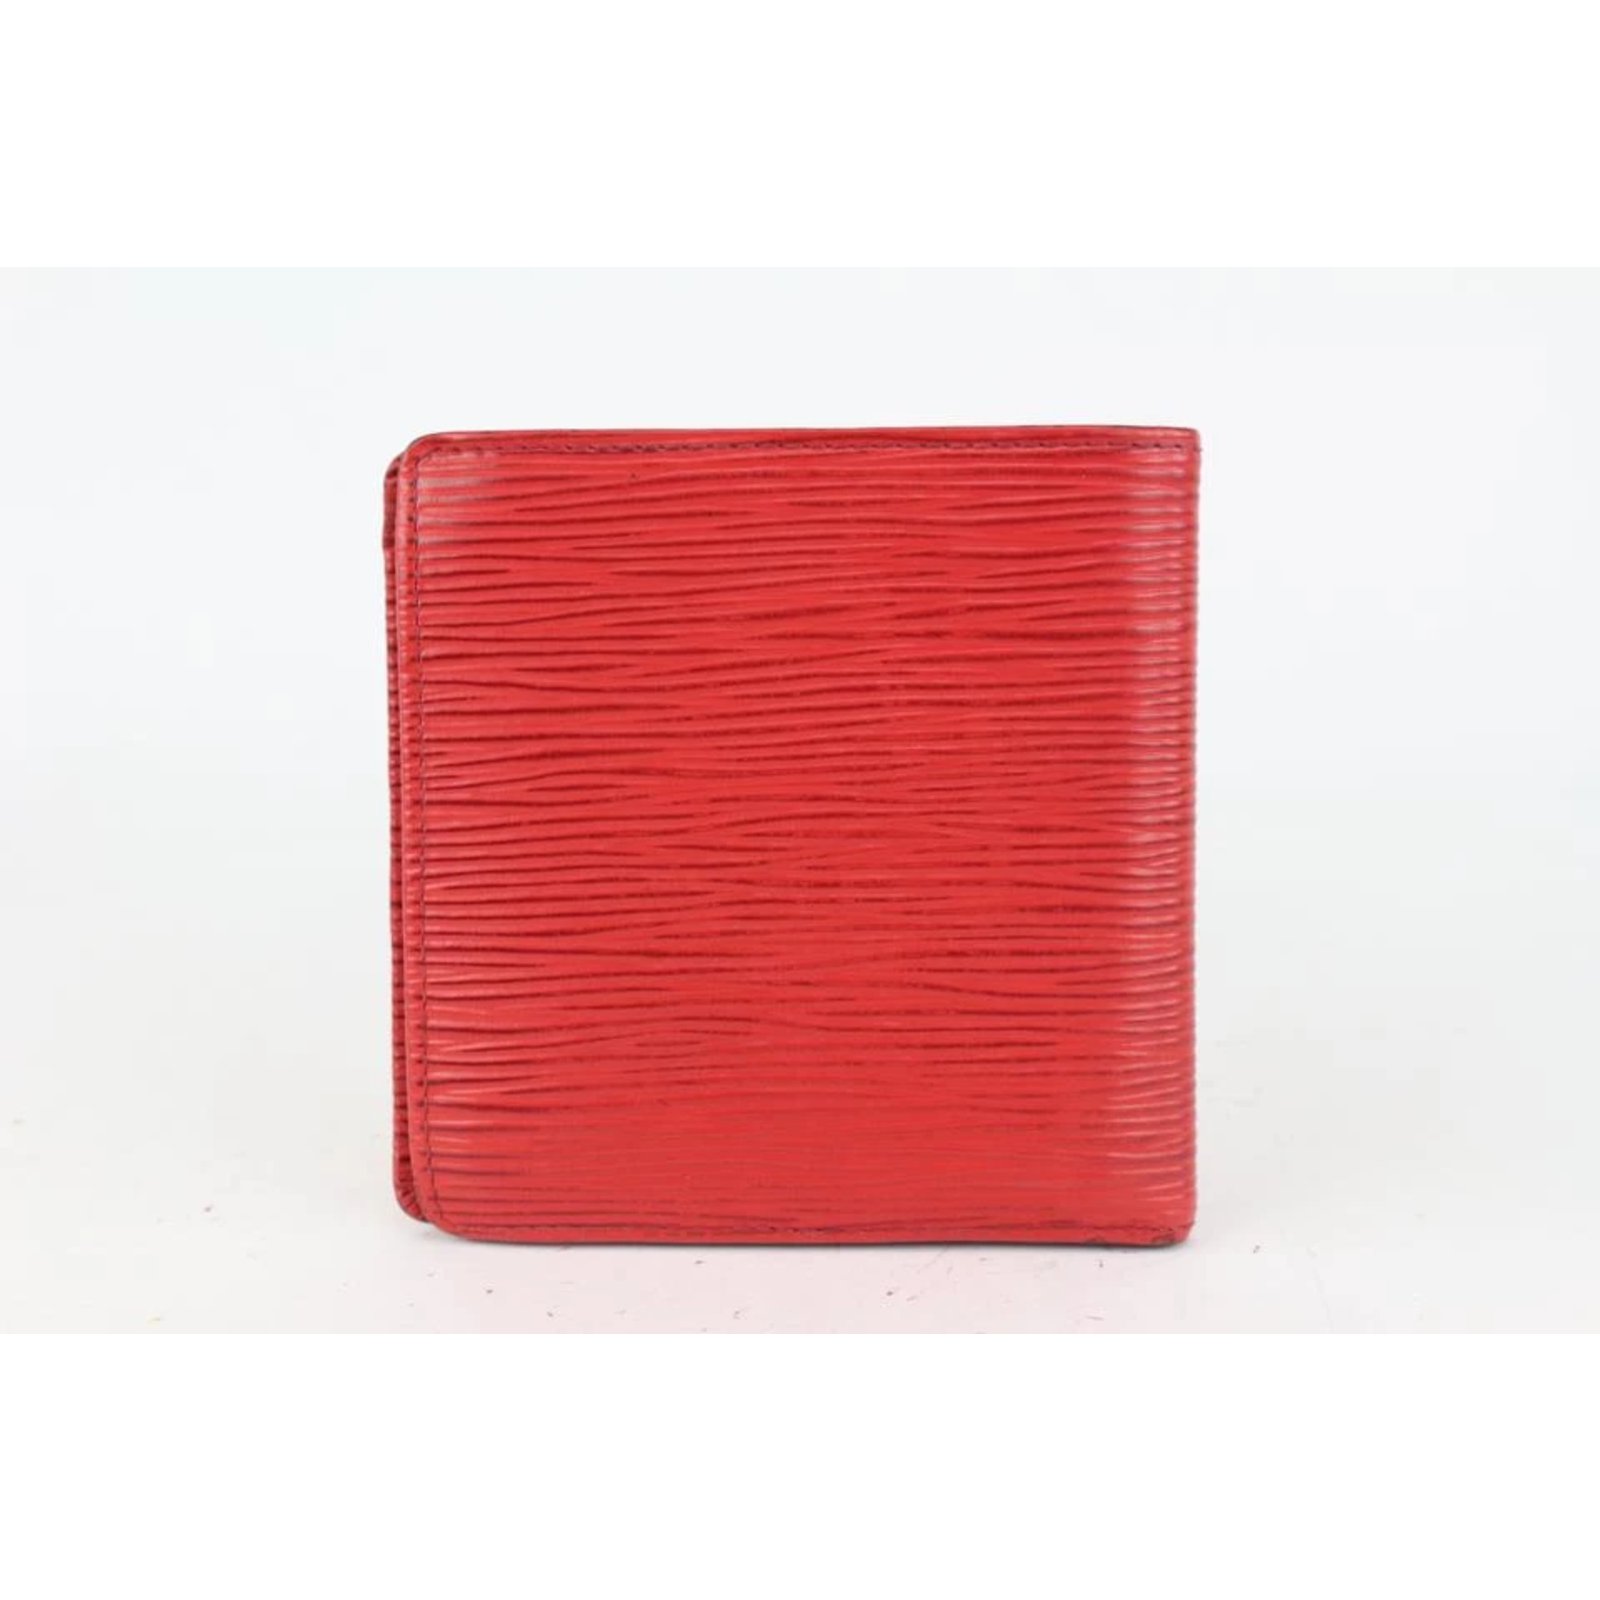 Louis Vuitton Red Epi Leather Bifold Business Card Wallet – Sell My Stuff  Canada - Canada's Content and Estate Sale Specialists